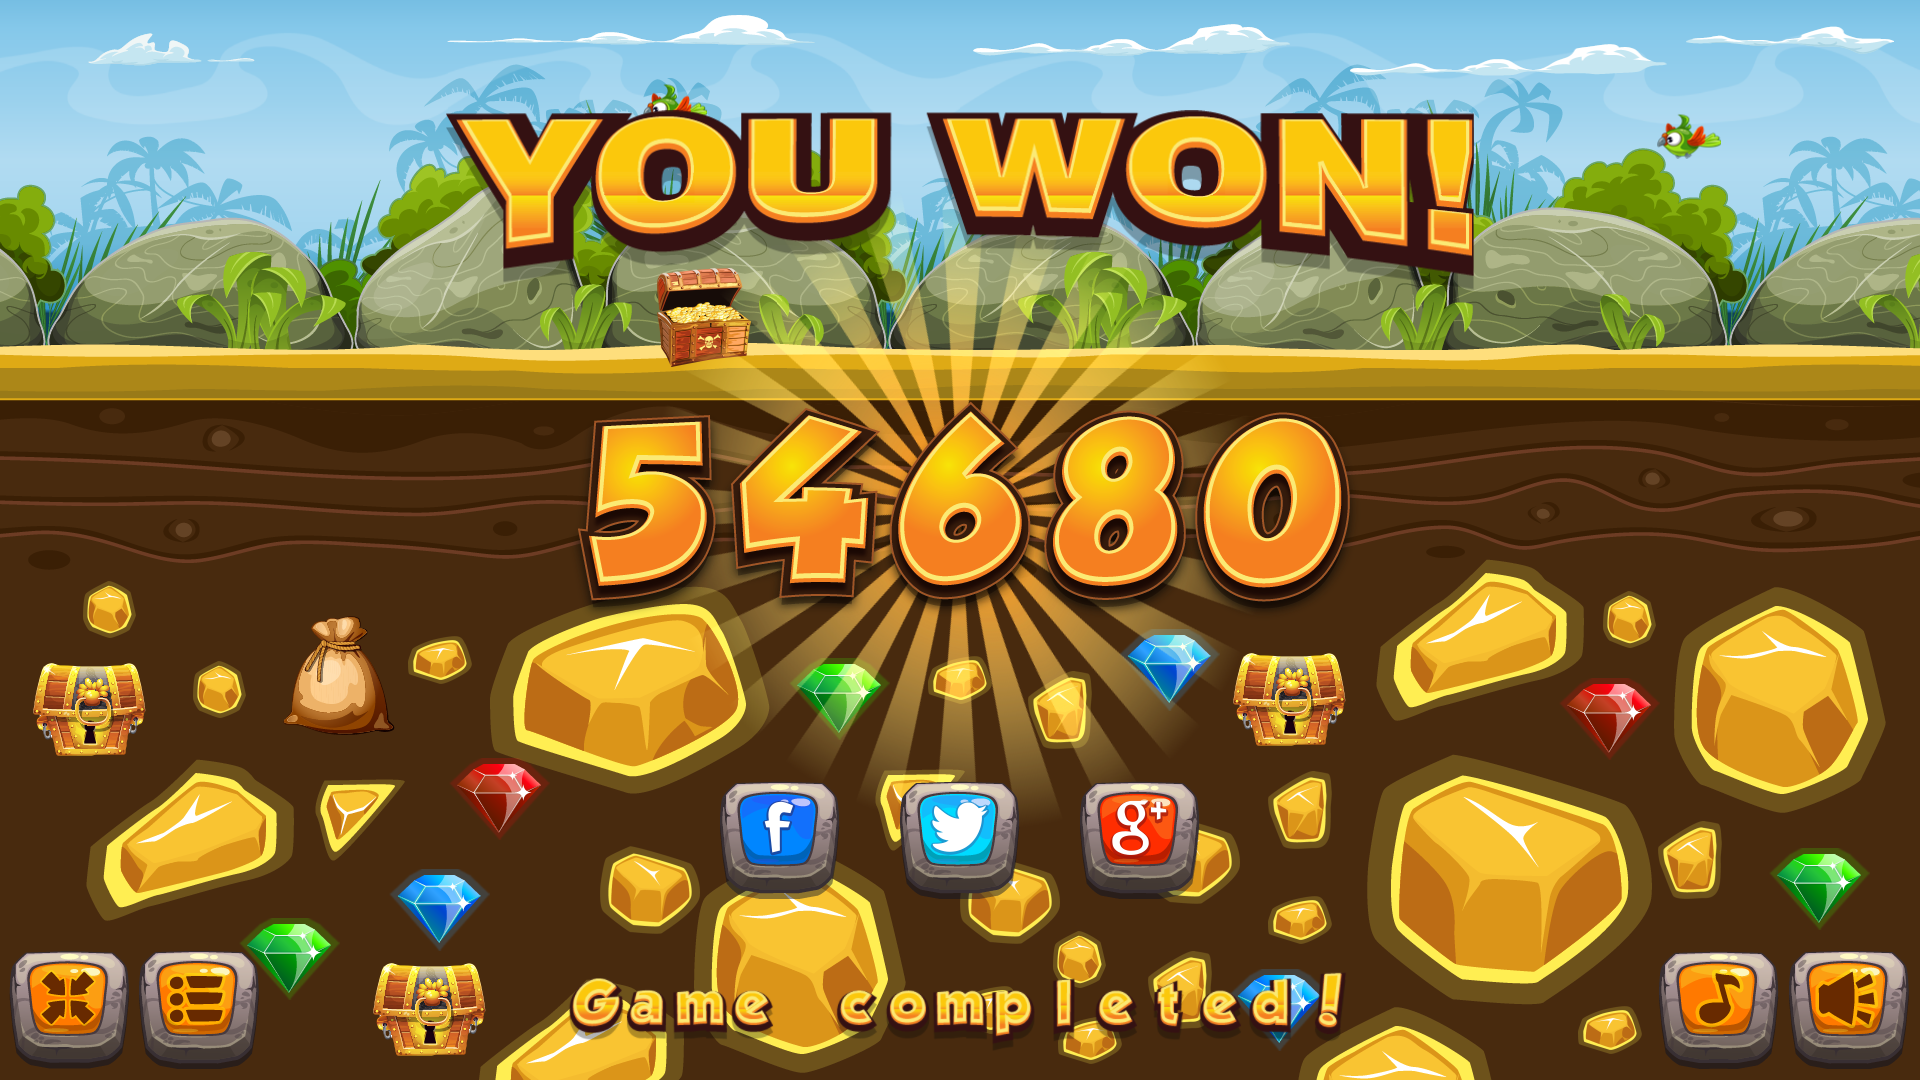 Gold Miner - HTML5 Game  Gold miners, Gold mining games, Fun puzzle games